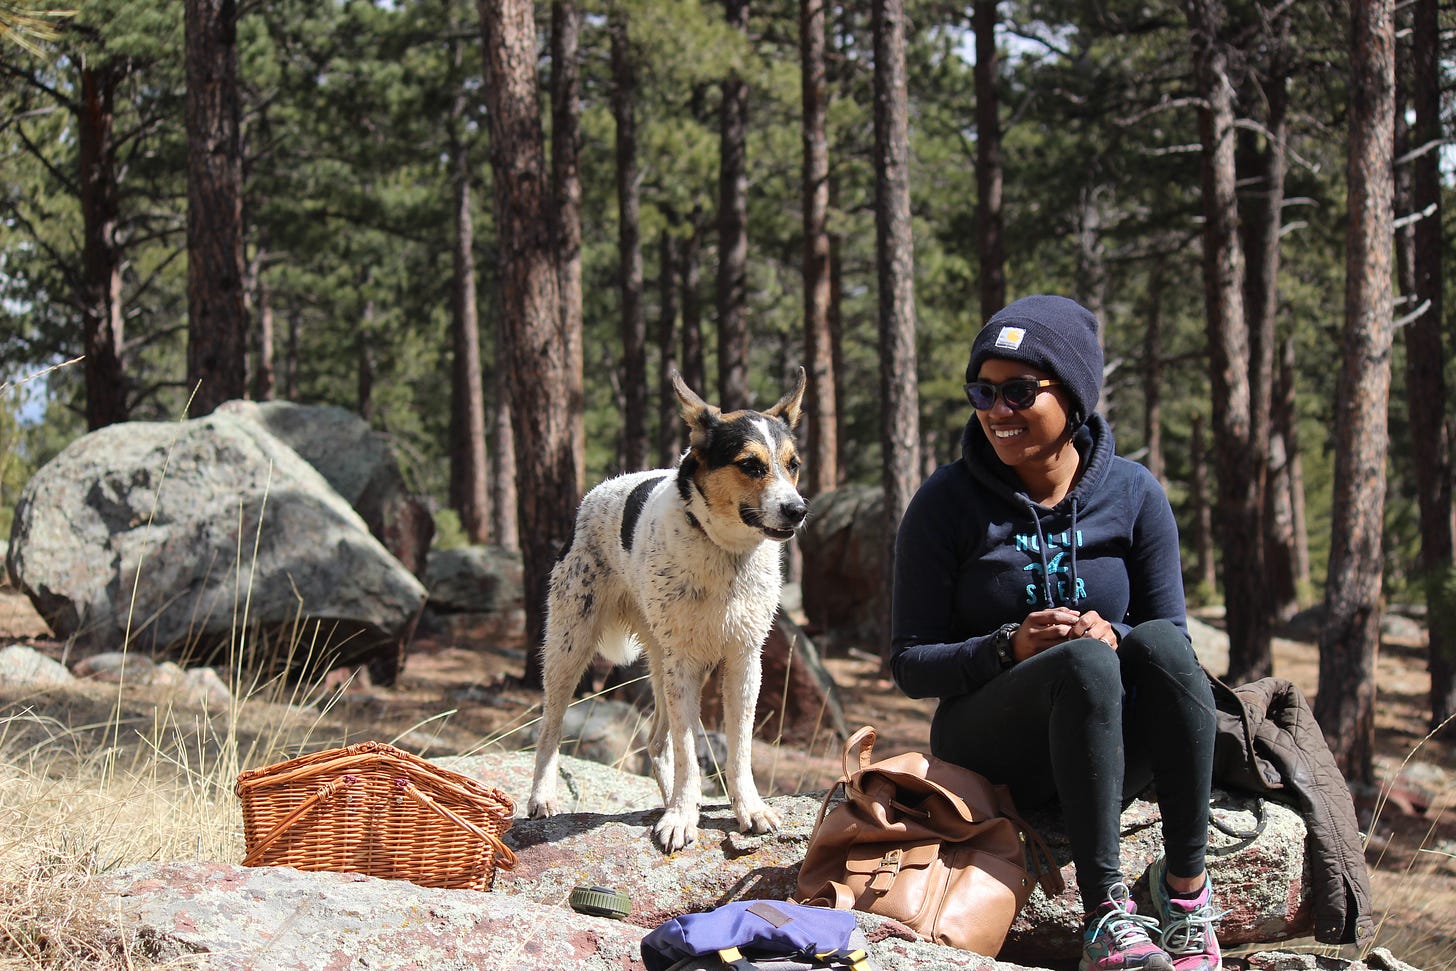 Me, sitting on a rock in Boulder, Colorado with my dog Leia. We are deep in the woods enjoying a special moment together